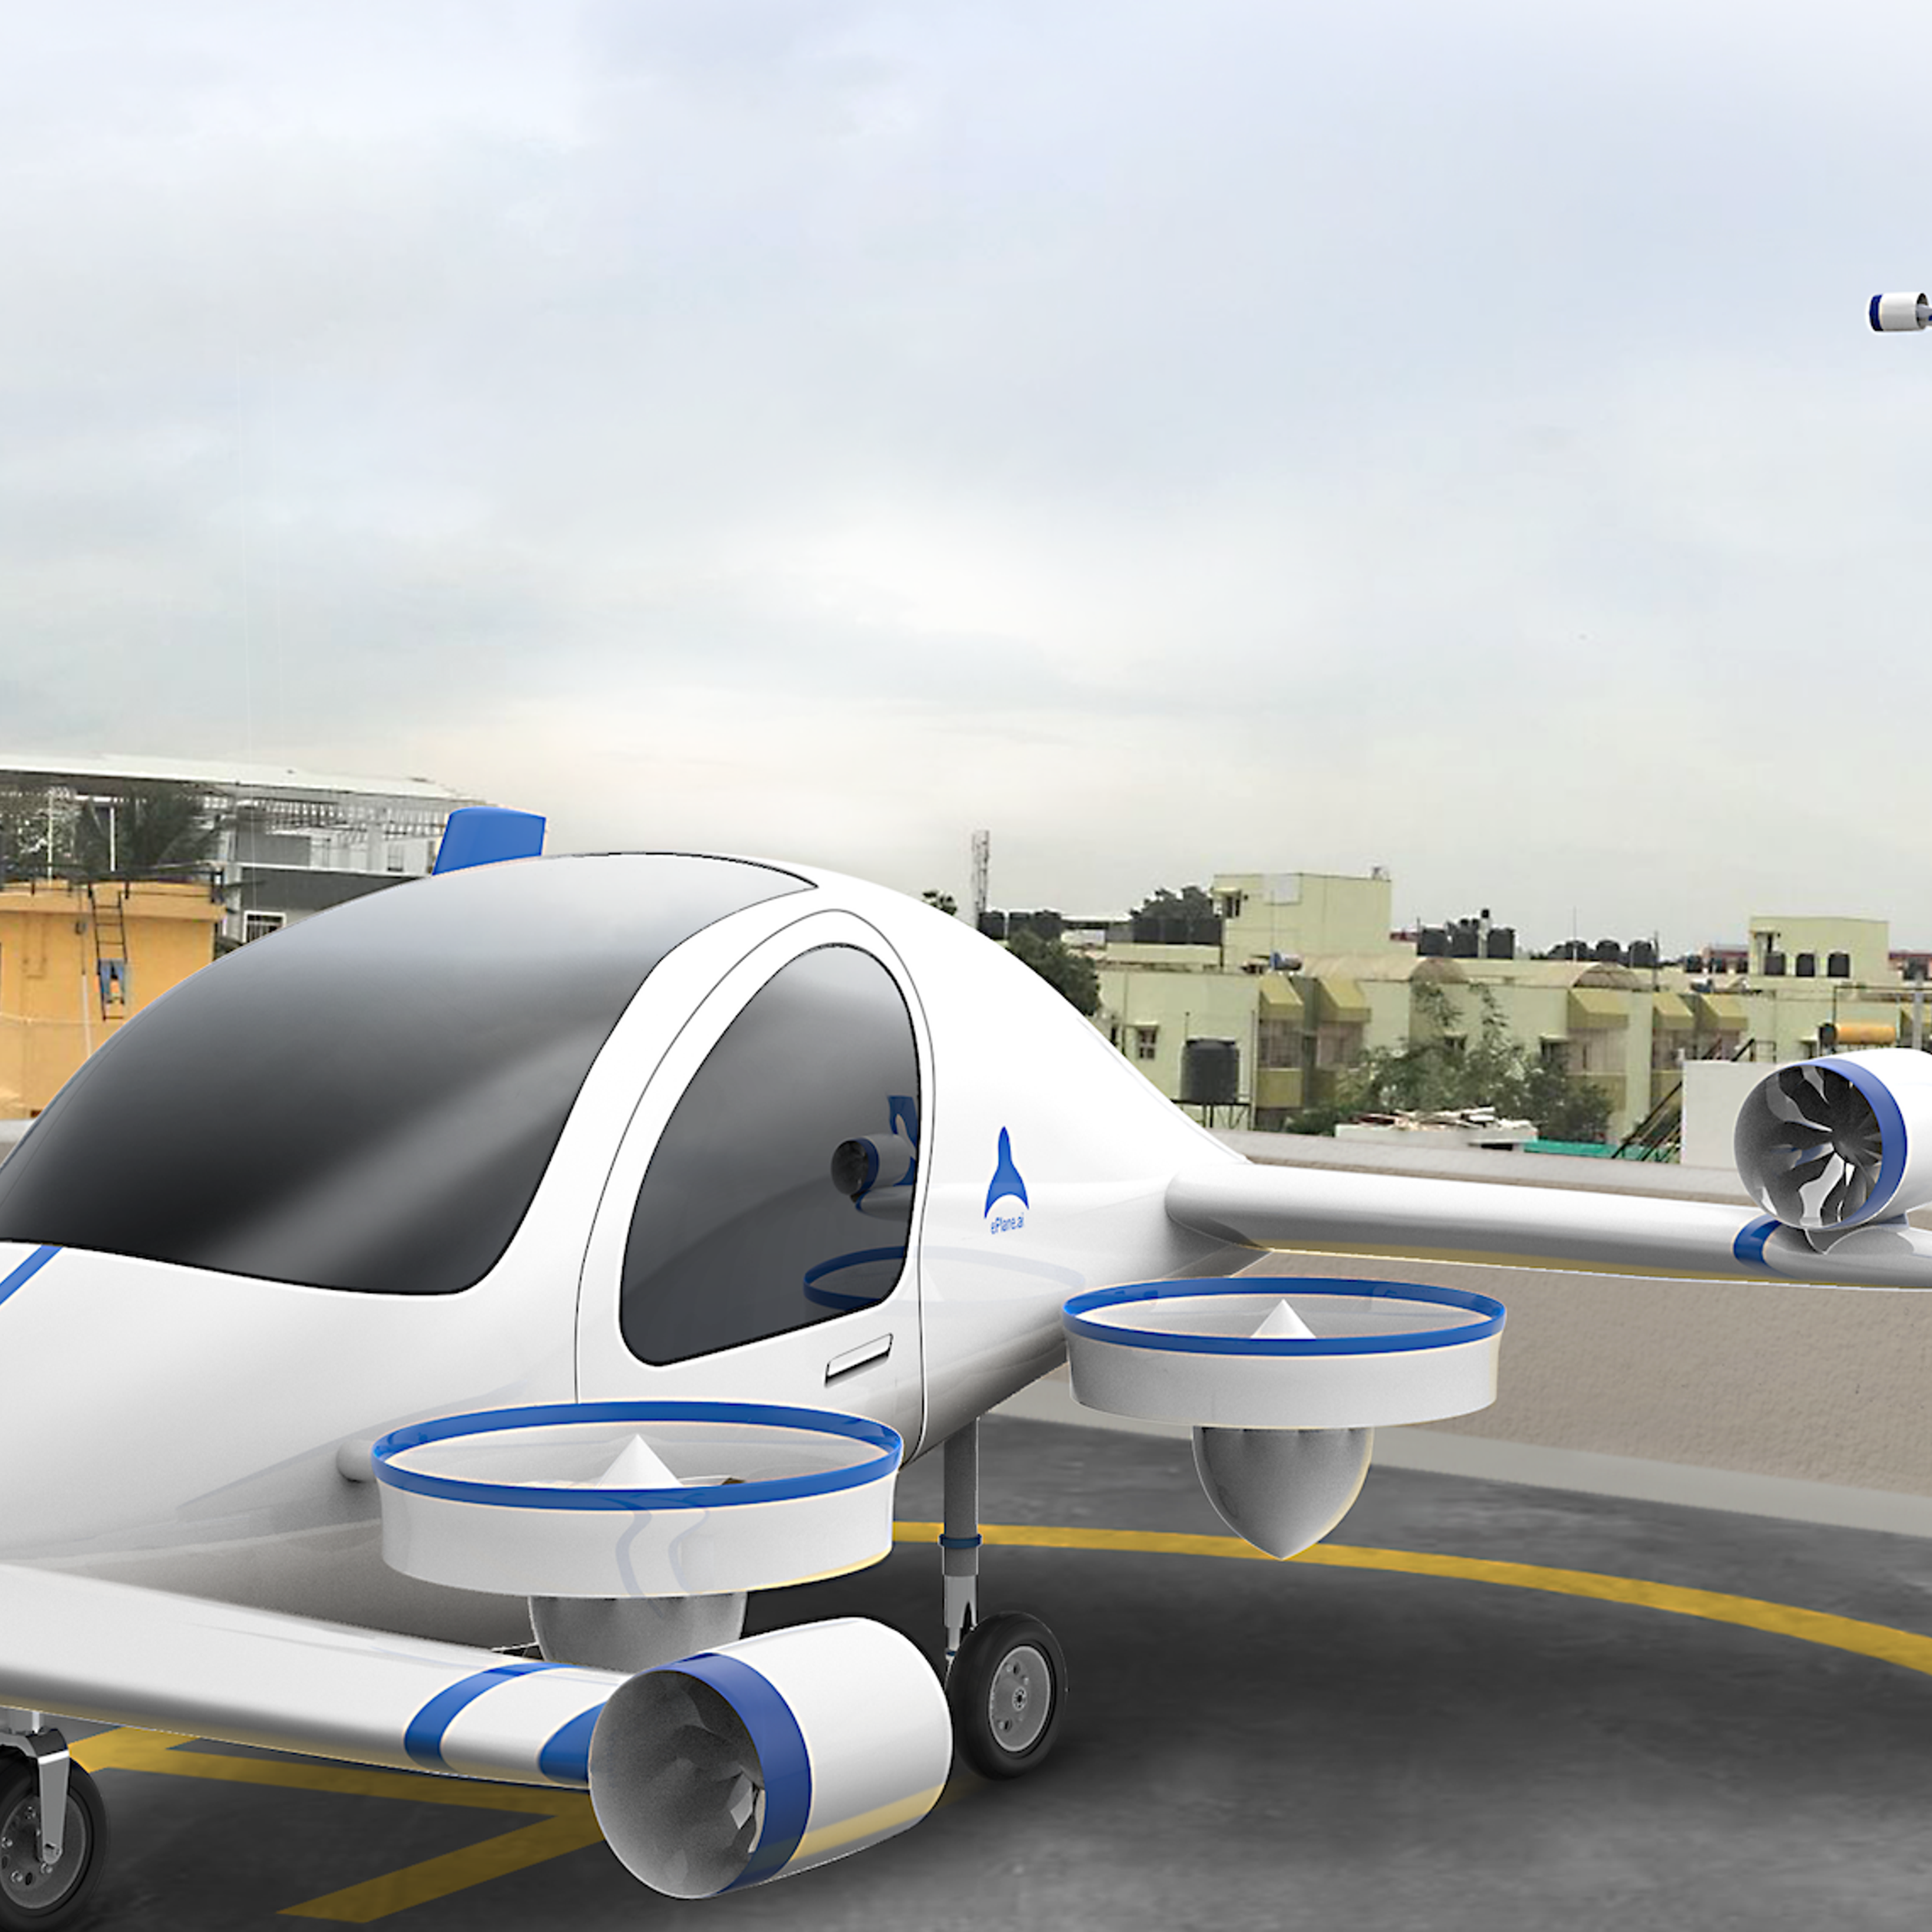 The ePlane aims to develop electric air taxi prototype by March 2025